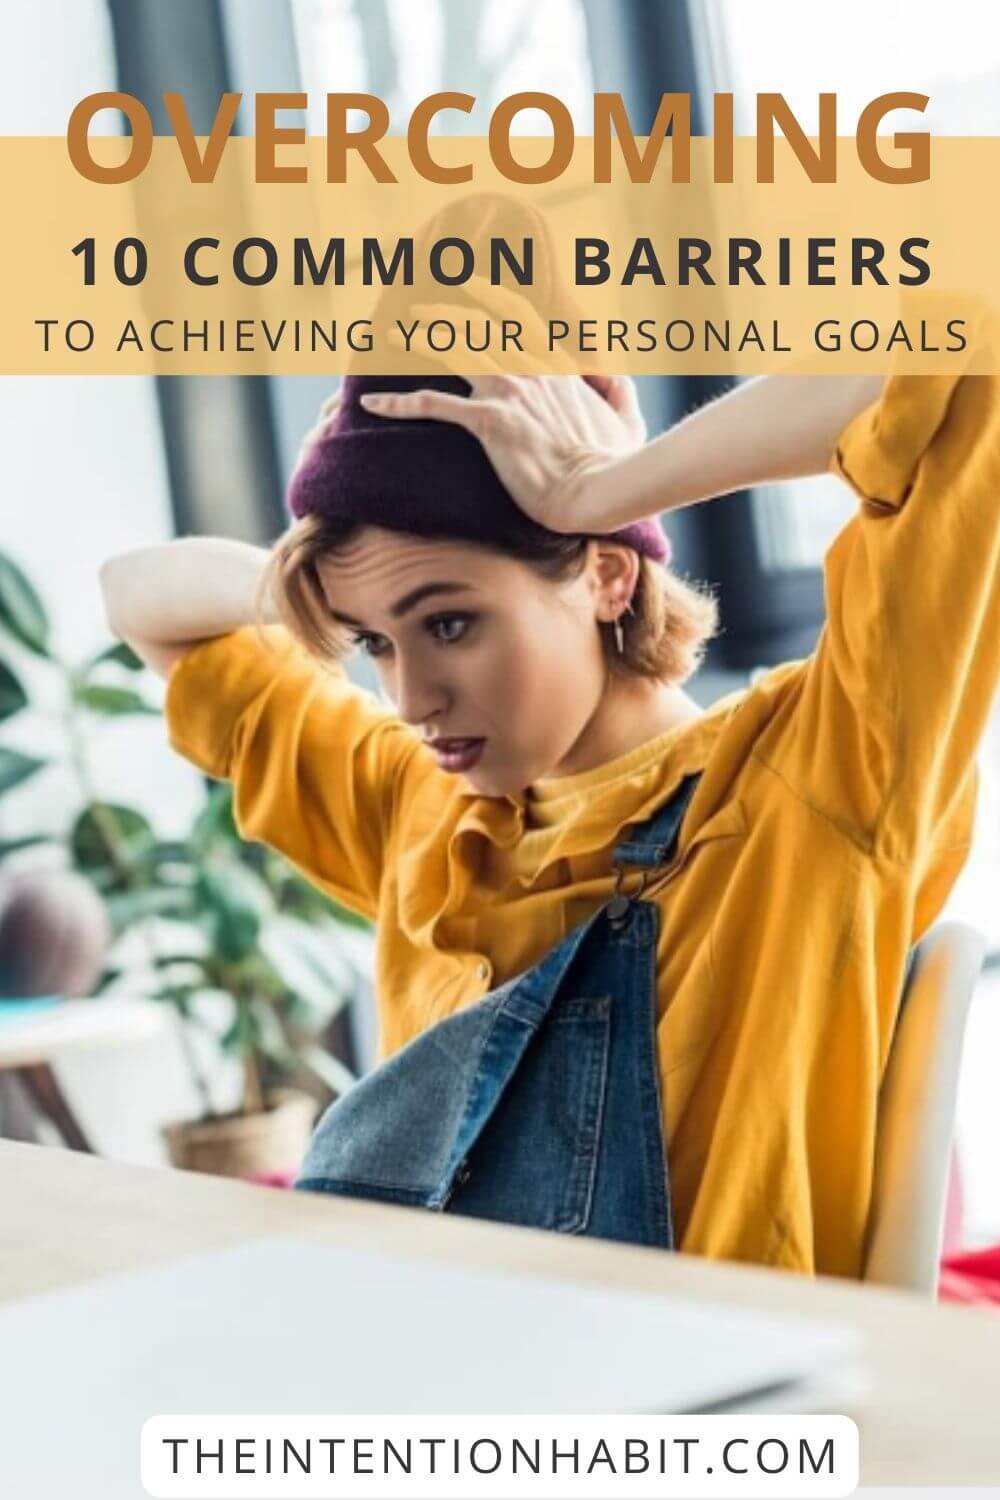 overcoming 10 common barriers to achieving your goals.